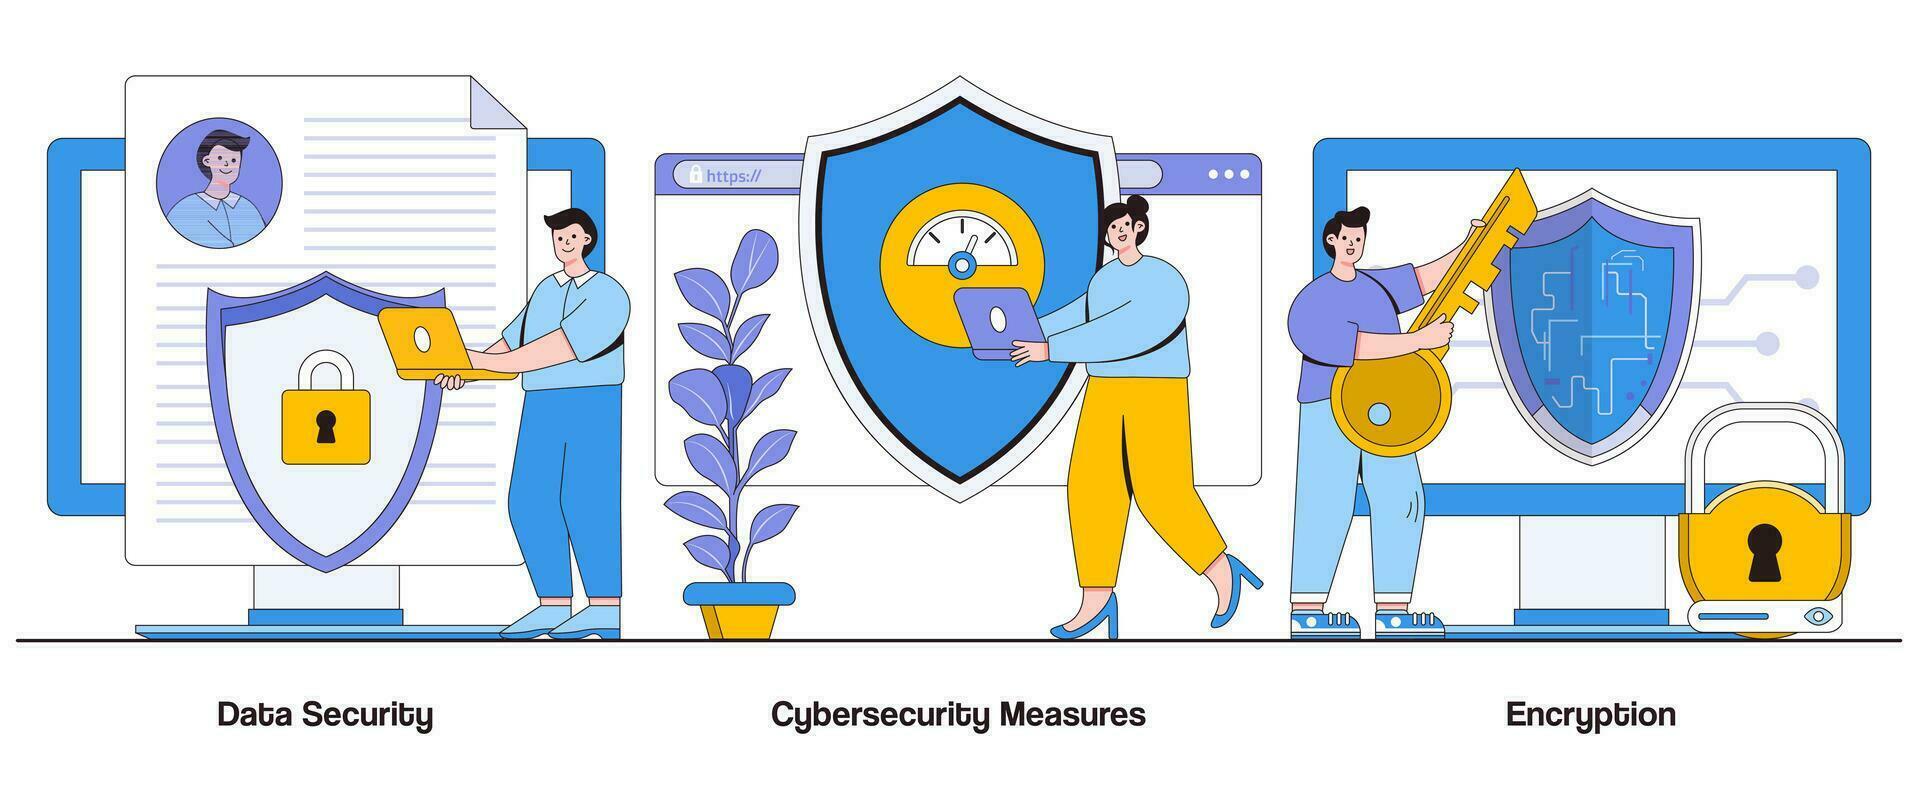 Data Security, Cybersecurity Measures, Encryption Concept with Character. Digital Protection Abstract Vector Illustration Set. Secure Communication, Cyber Threats Metaphor